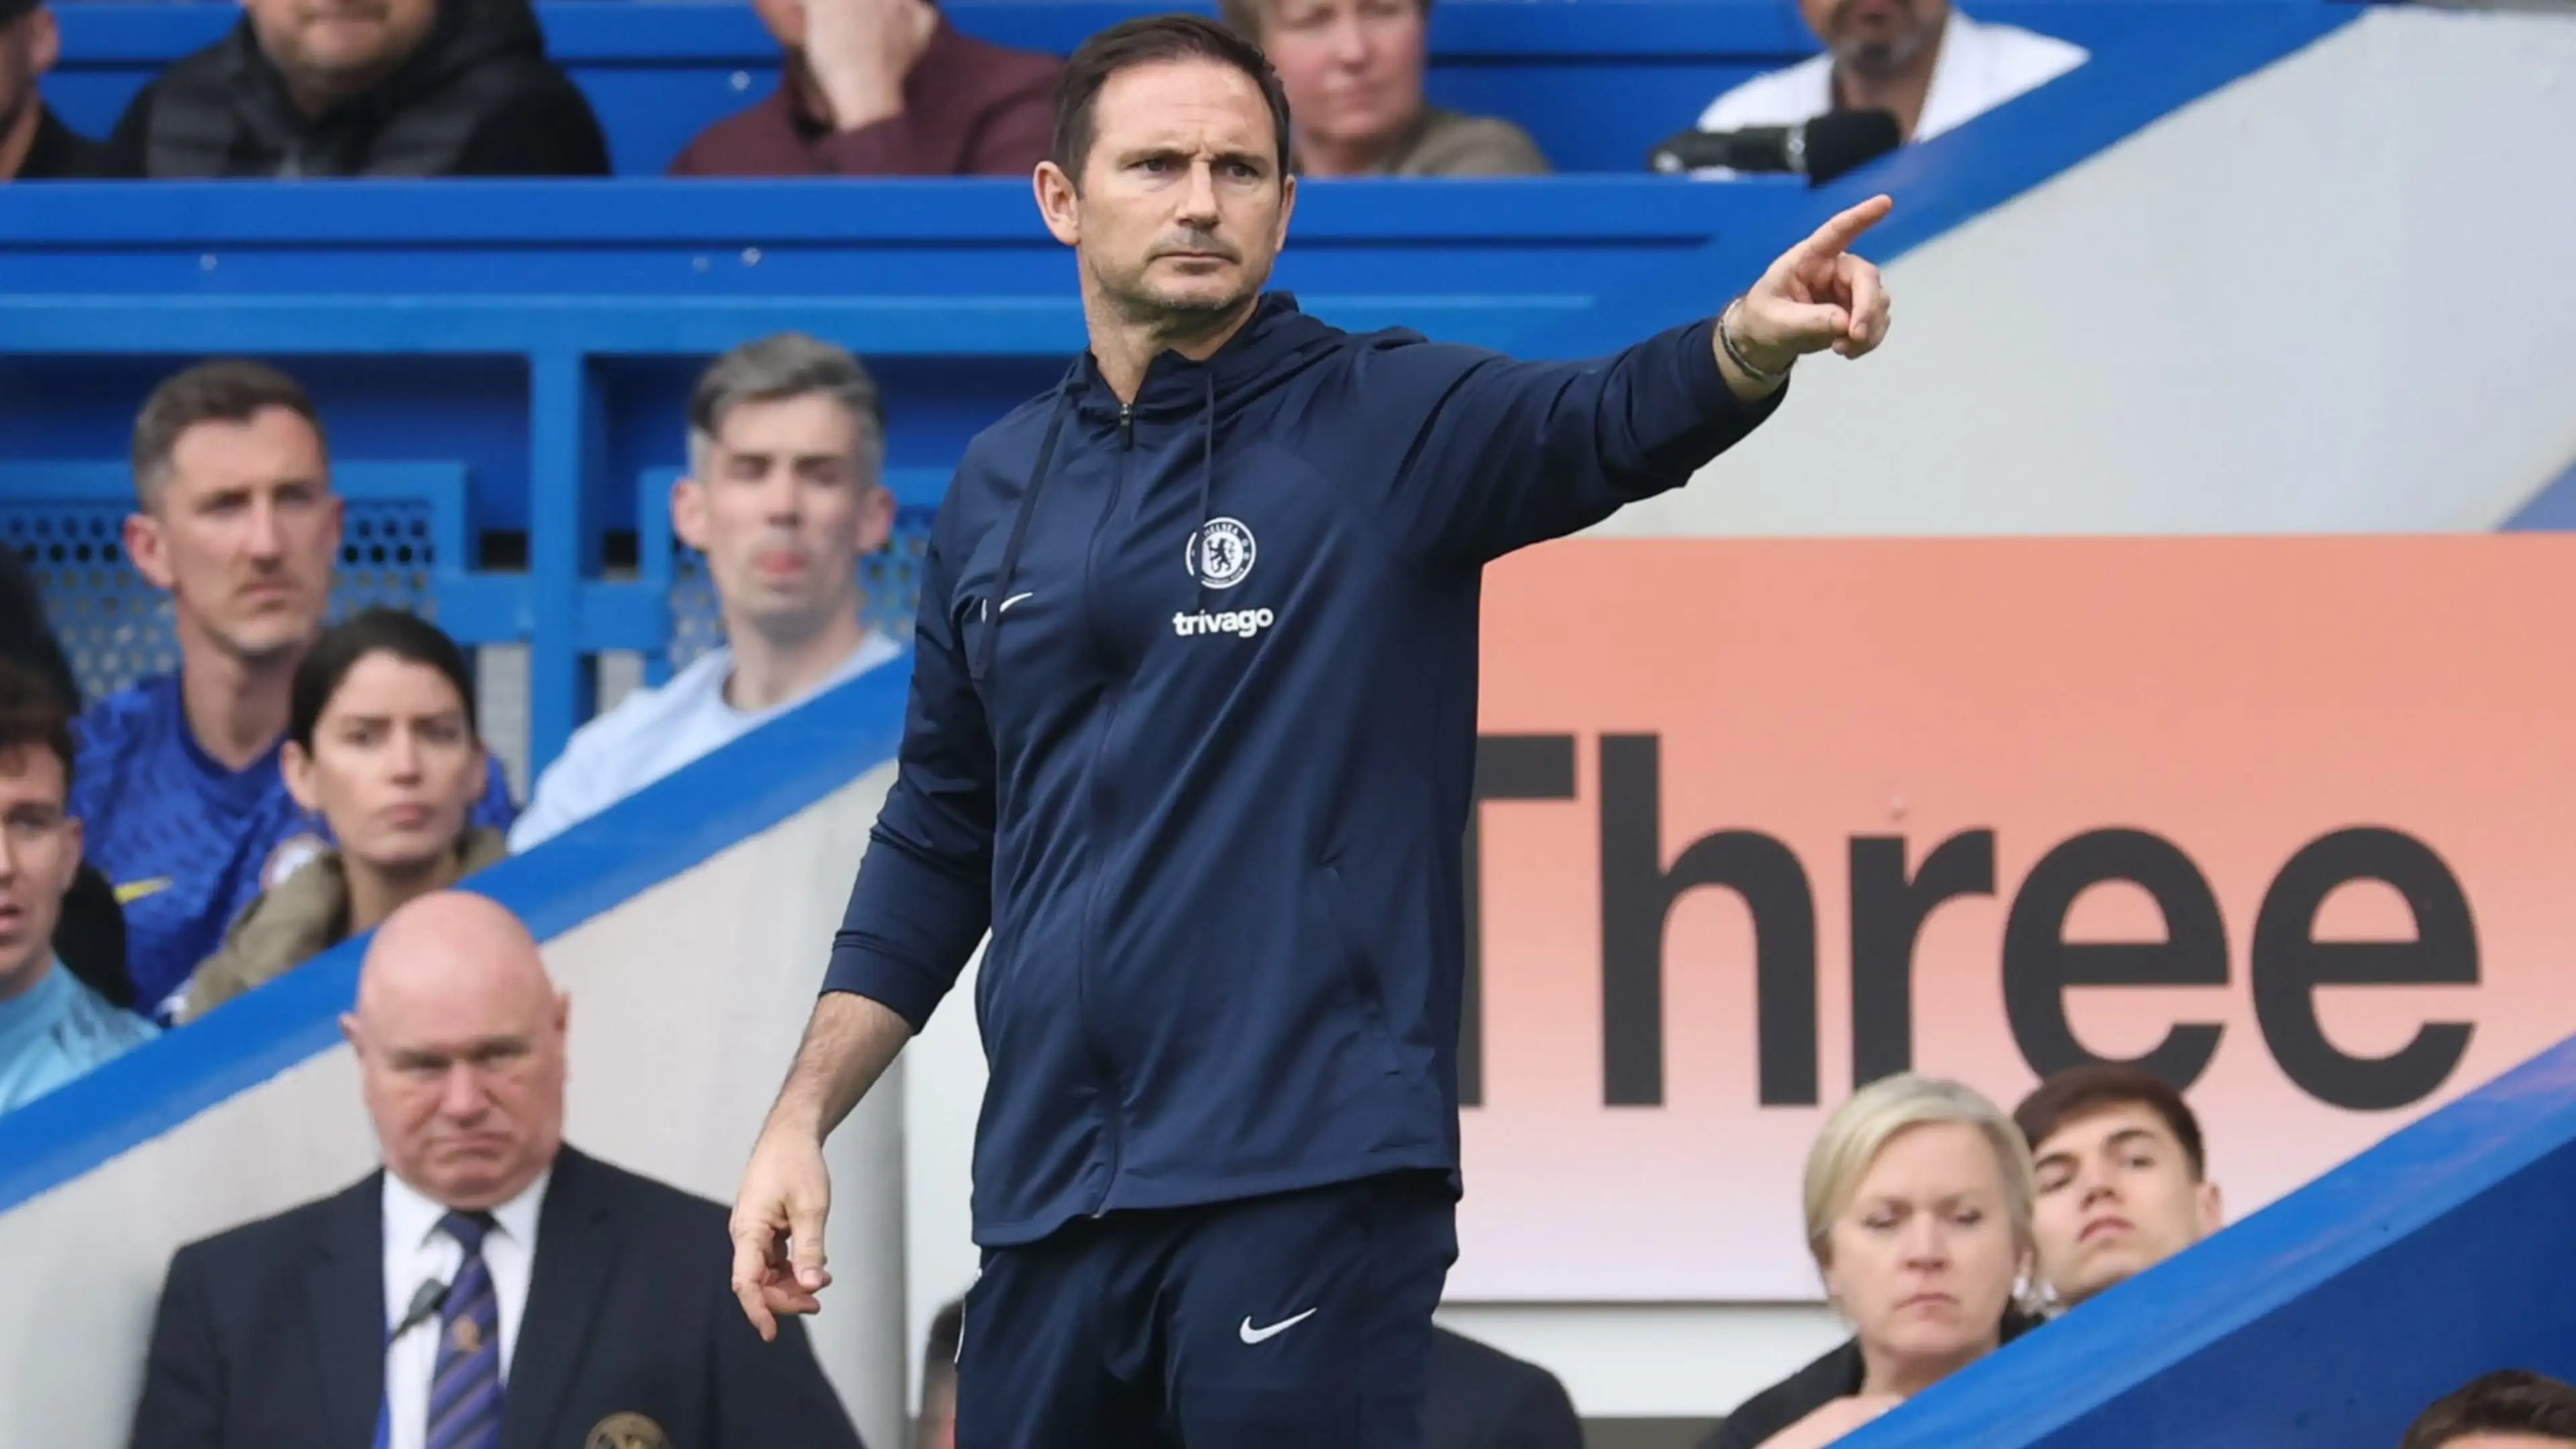 Insider Merlo: Pochettino to Sign with Chelsea until 2026, Lampard to Coach Until the End of 2022/2023 Season